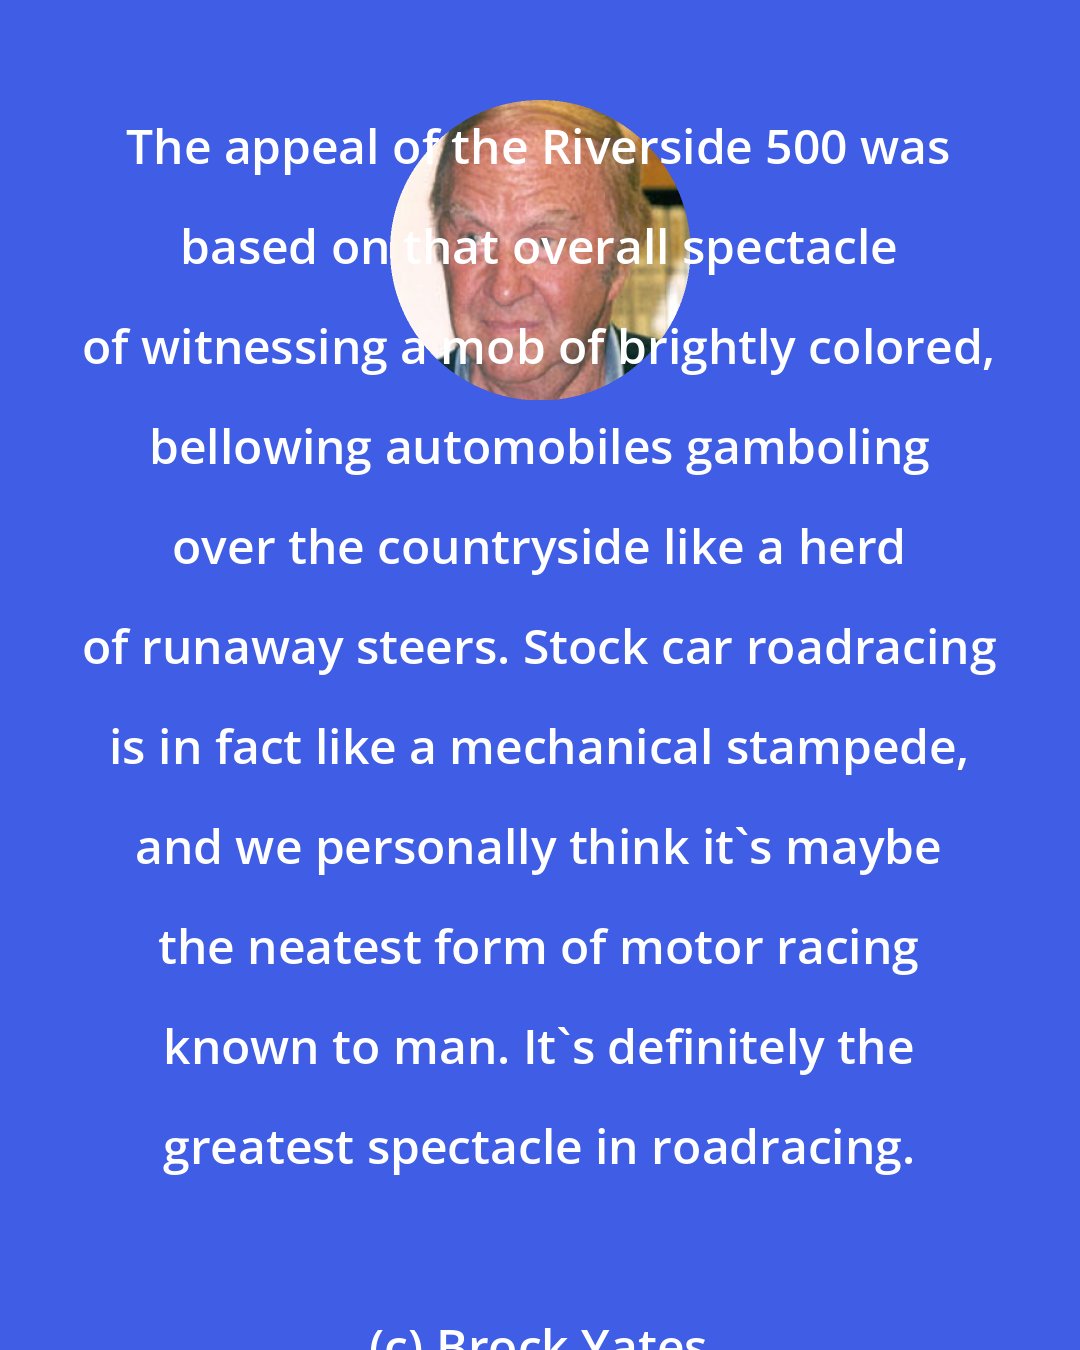 Brock Yates: The appeal of the Riverside 500 was based on that overall spectacle of witnessing a mob of brightly colored, bellowing automobiles gamboling over the countryside like a herd of runaway steers. Stock car roadracing is in fact like a mechanical stampede, and we personally think it's maybe the neatest form of motor racing known to man. It's definitely the greatest spectacle in roadracing.